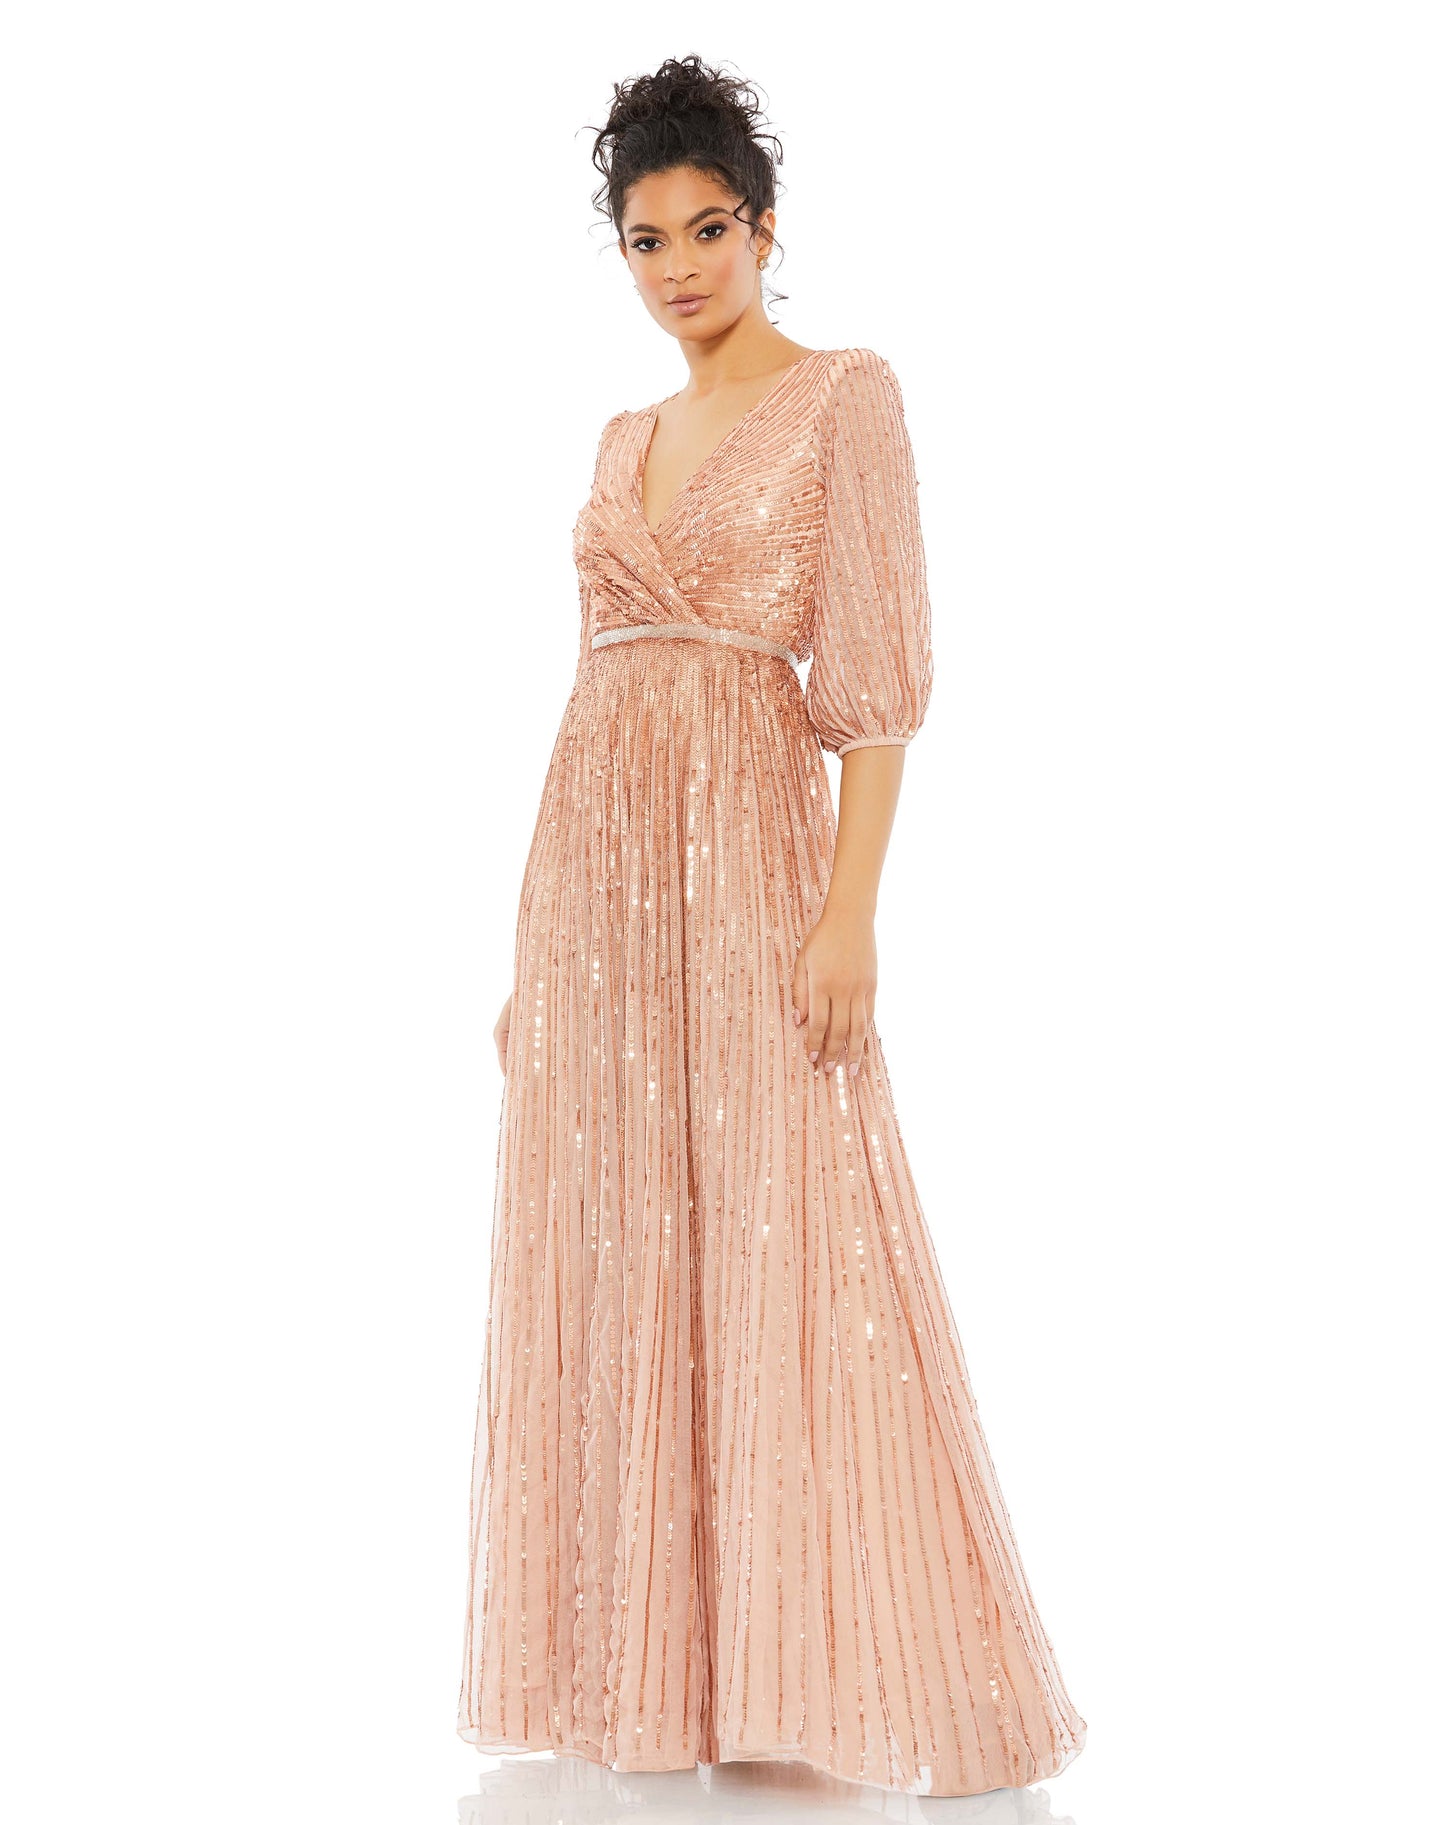 Indulge your present-day princess fantasies with this dreamy dress. Our gown is made of whisper-thin tulle with sequin stripes that appear farther apart as the skirt gets fuller. And it’s not just the embellishments that elevate this confection. The dress